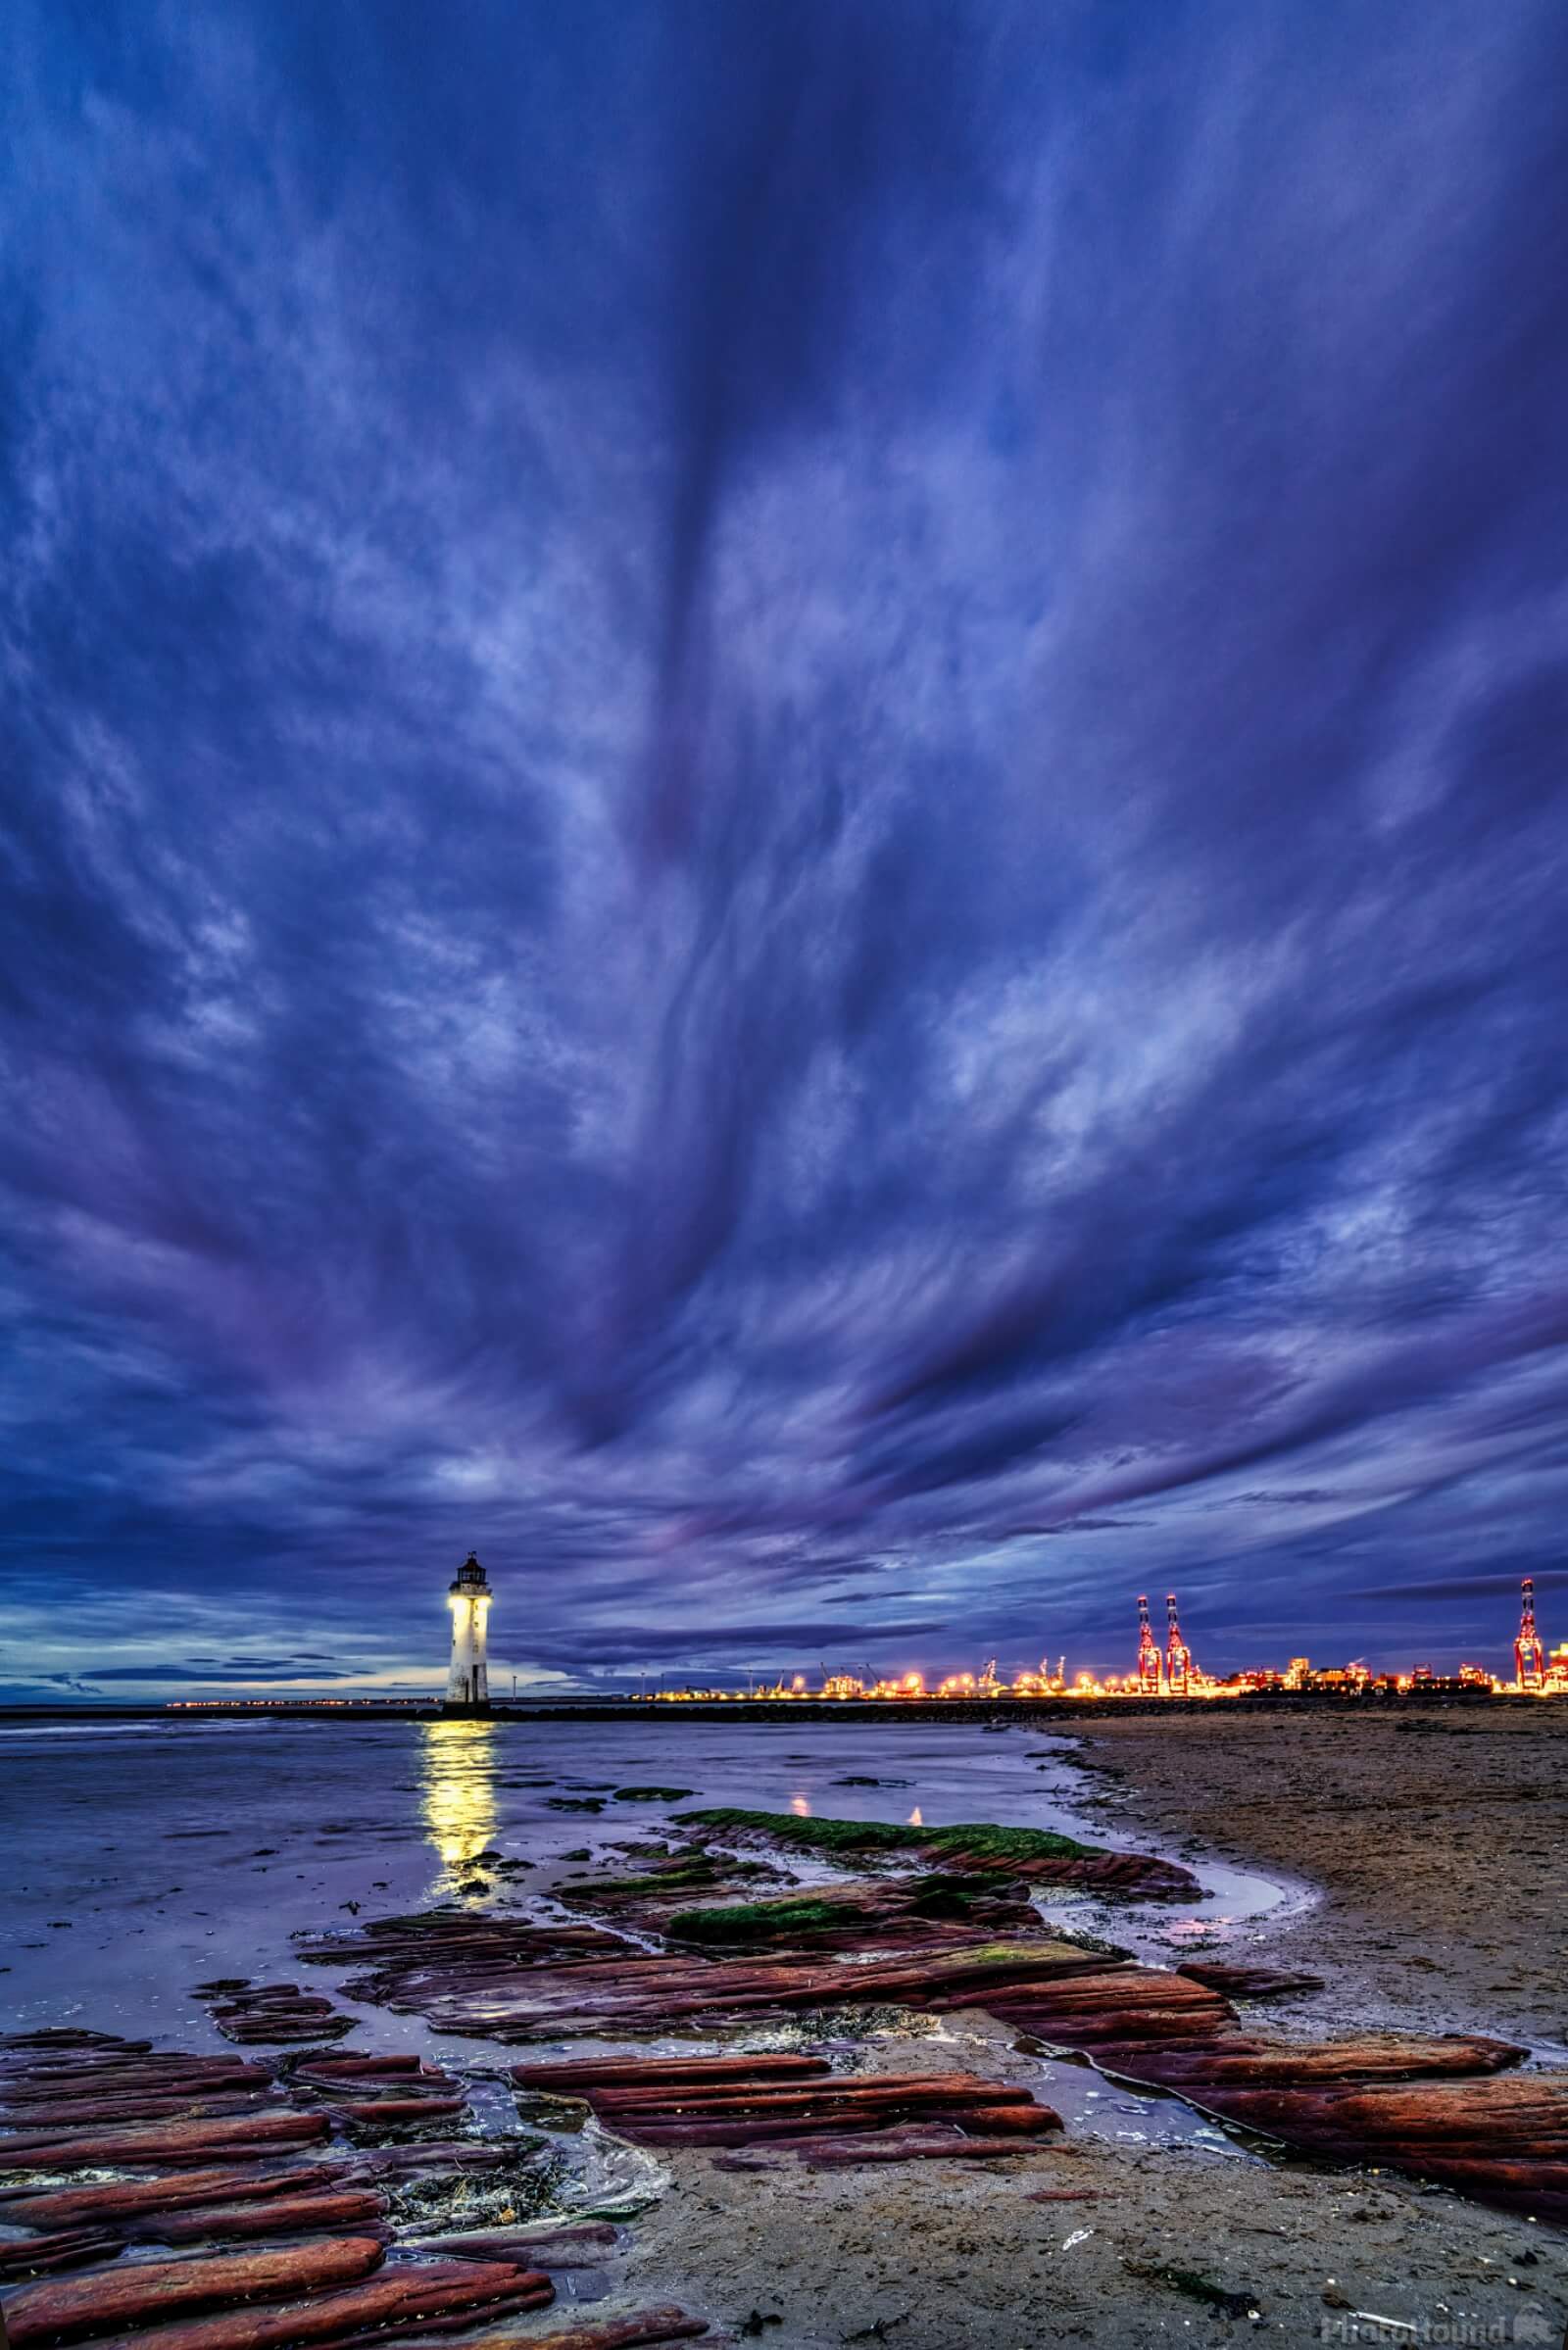 Image of New Brighton Lighthouse & Fort Perch Rock by Peter Zalabai